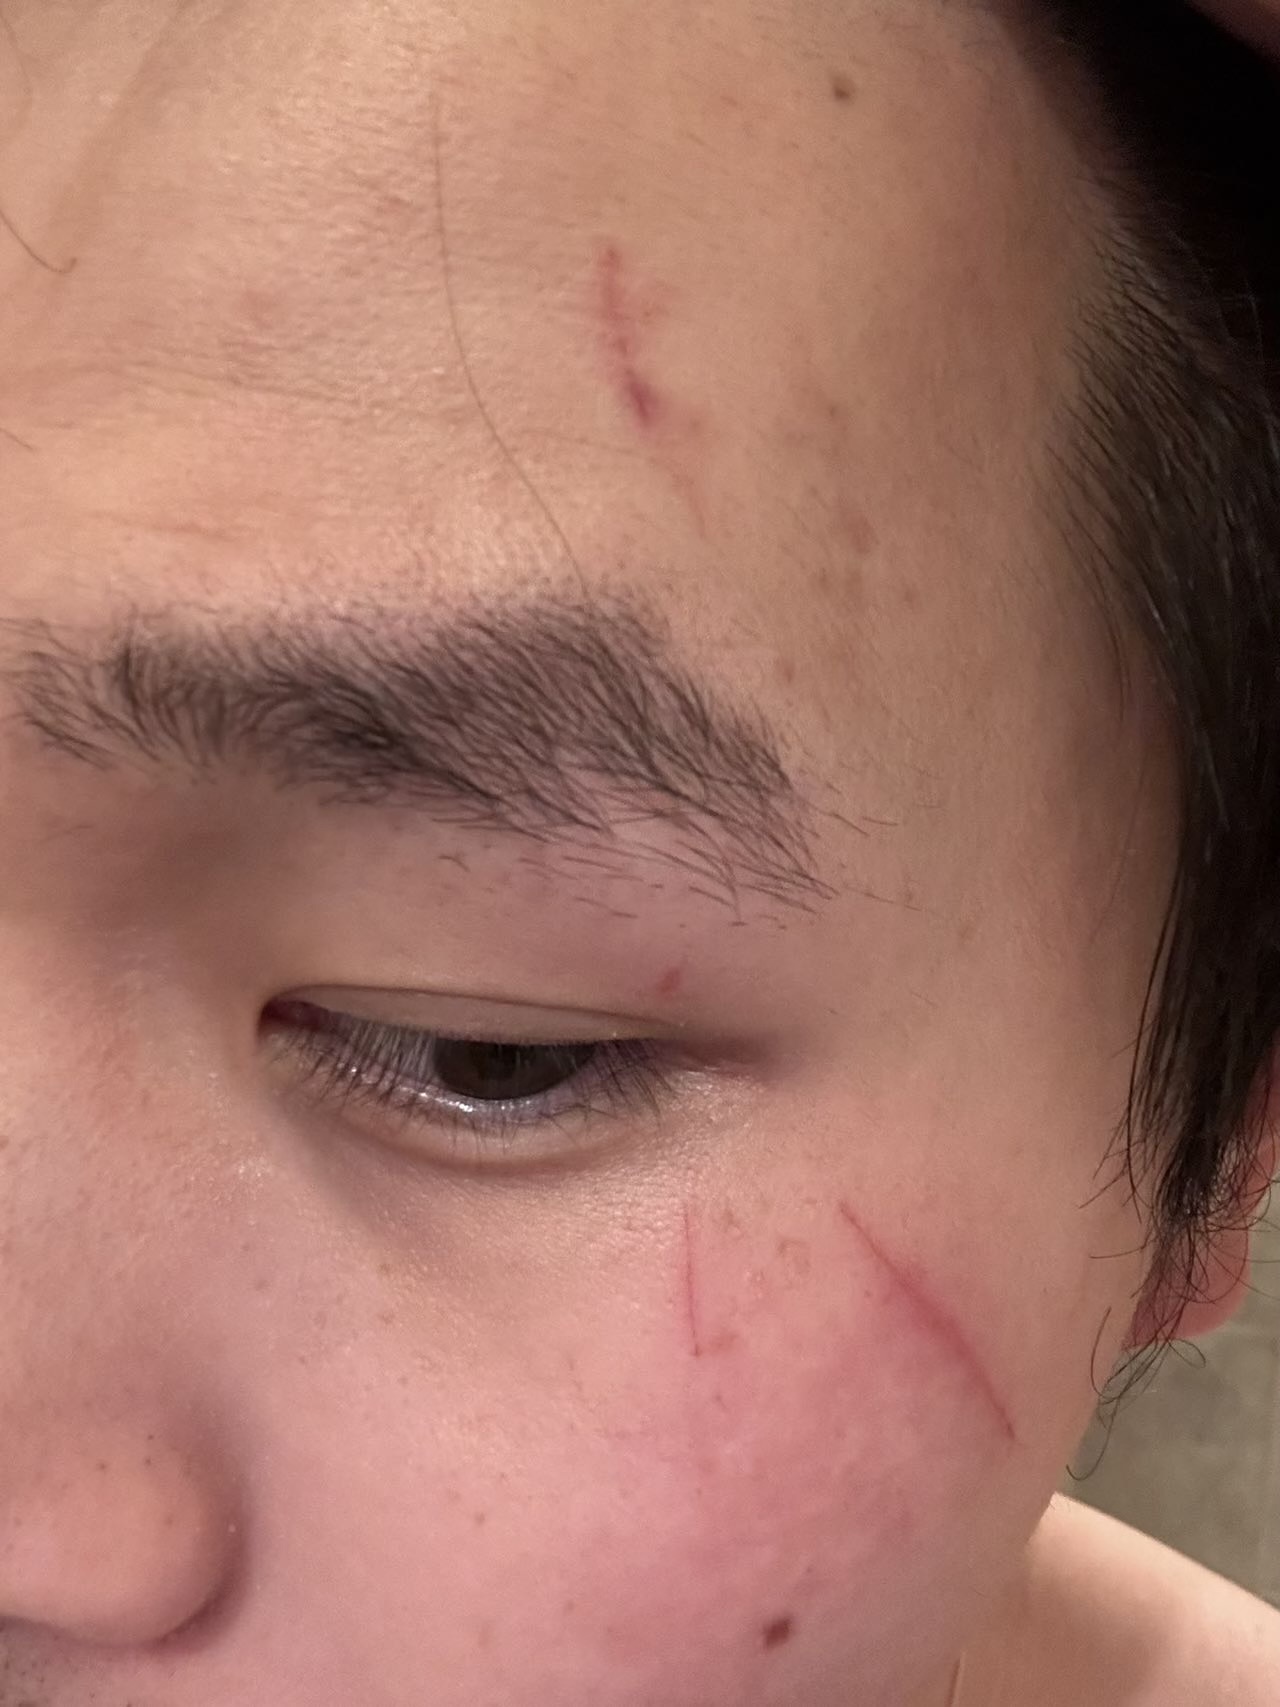 Close-up of a person's face showing a closed eye, eyebrow, and forehead with visible scratches.